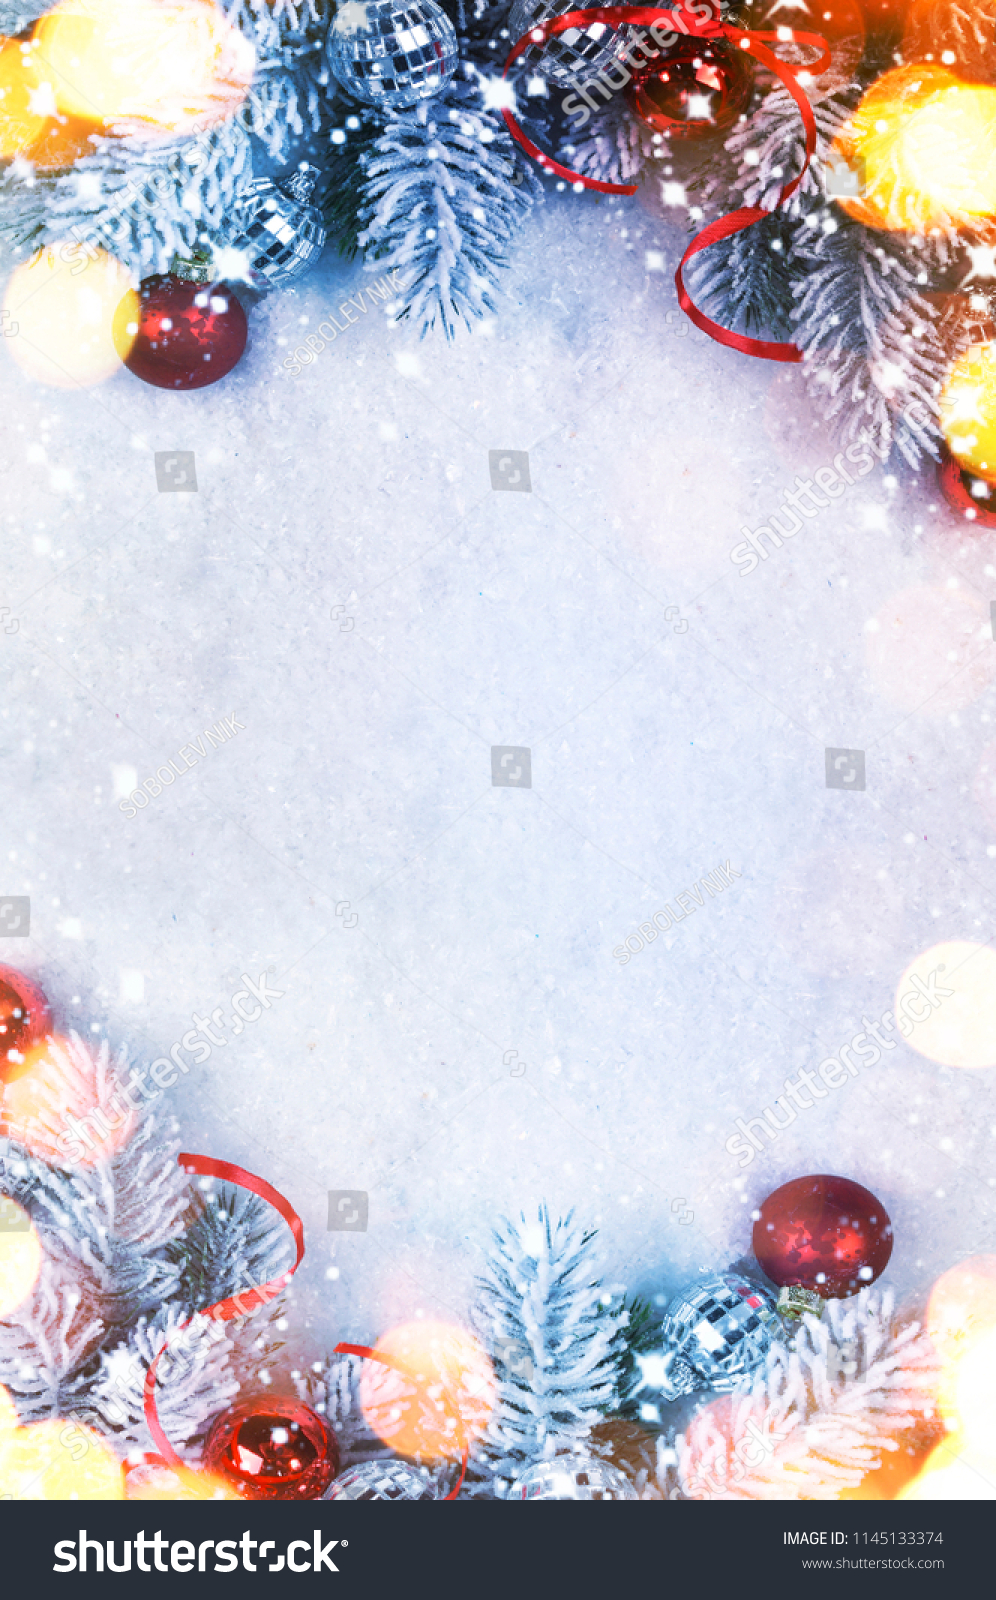 Christmas and New Year holidays background #1145133374